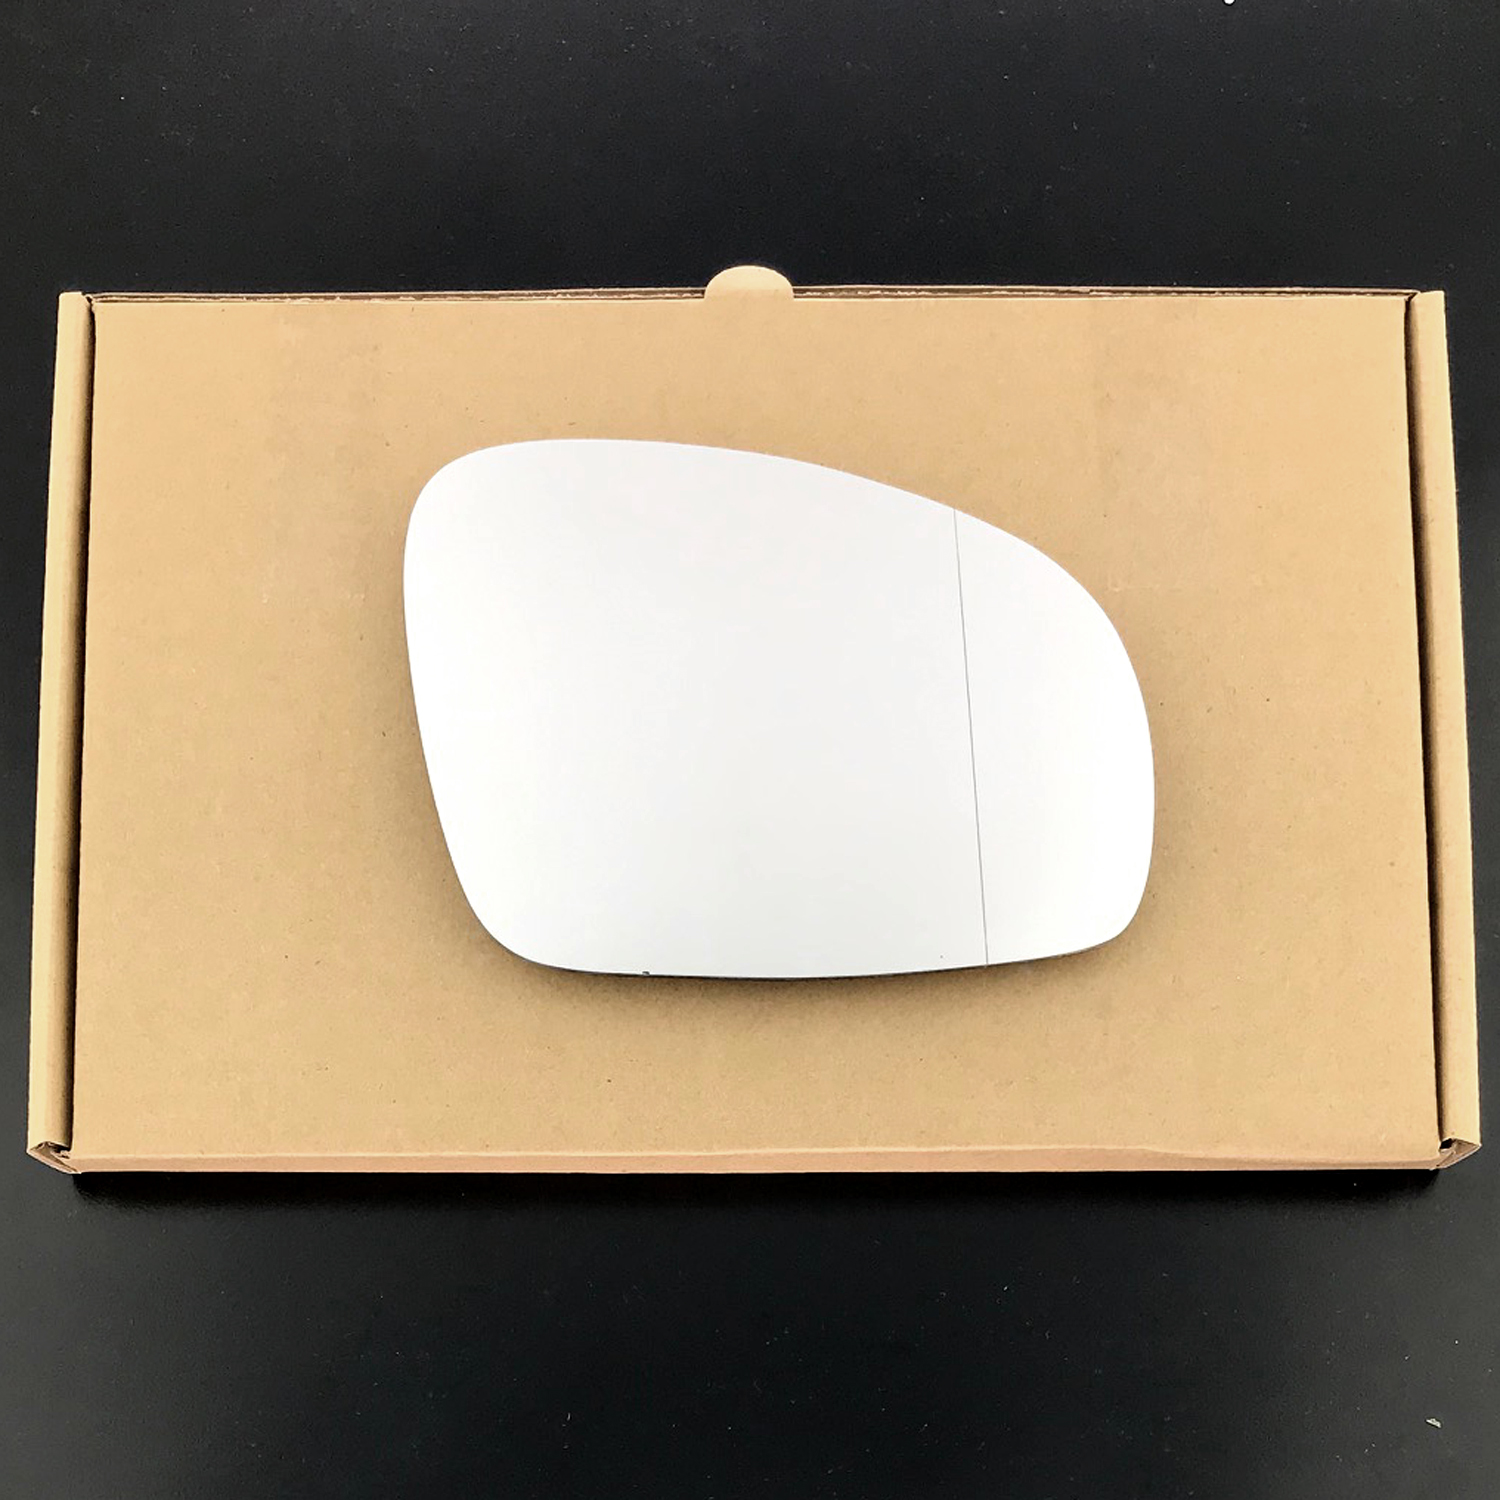 Skoda Roomster Wing Mirror Glass RIGHT HAND ( UK Driver Side ) 2006 to 2015 – Wide Angle Wing Mirror